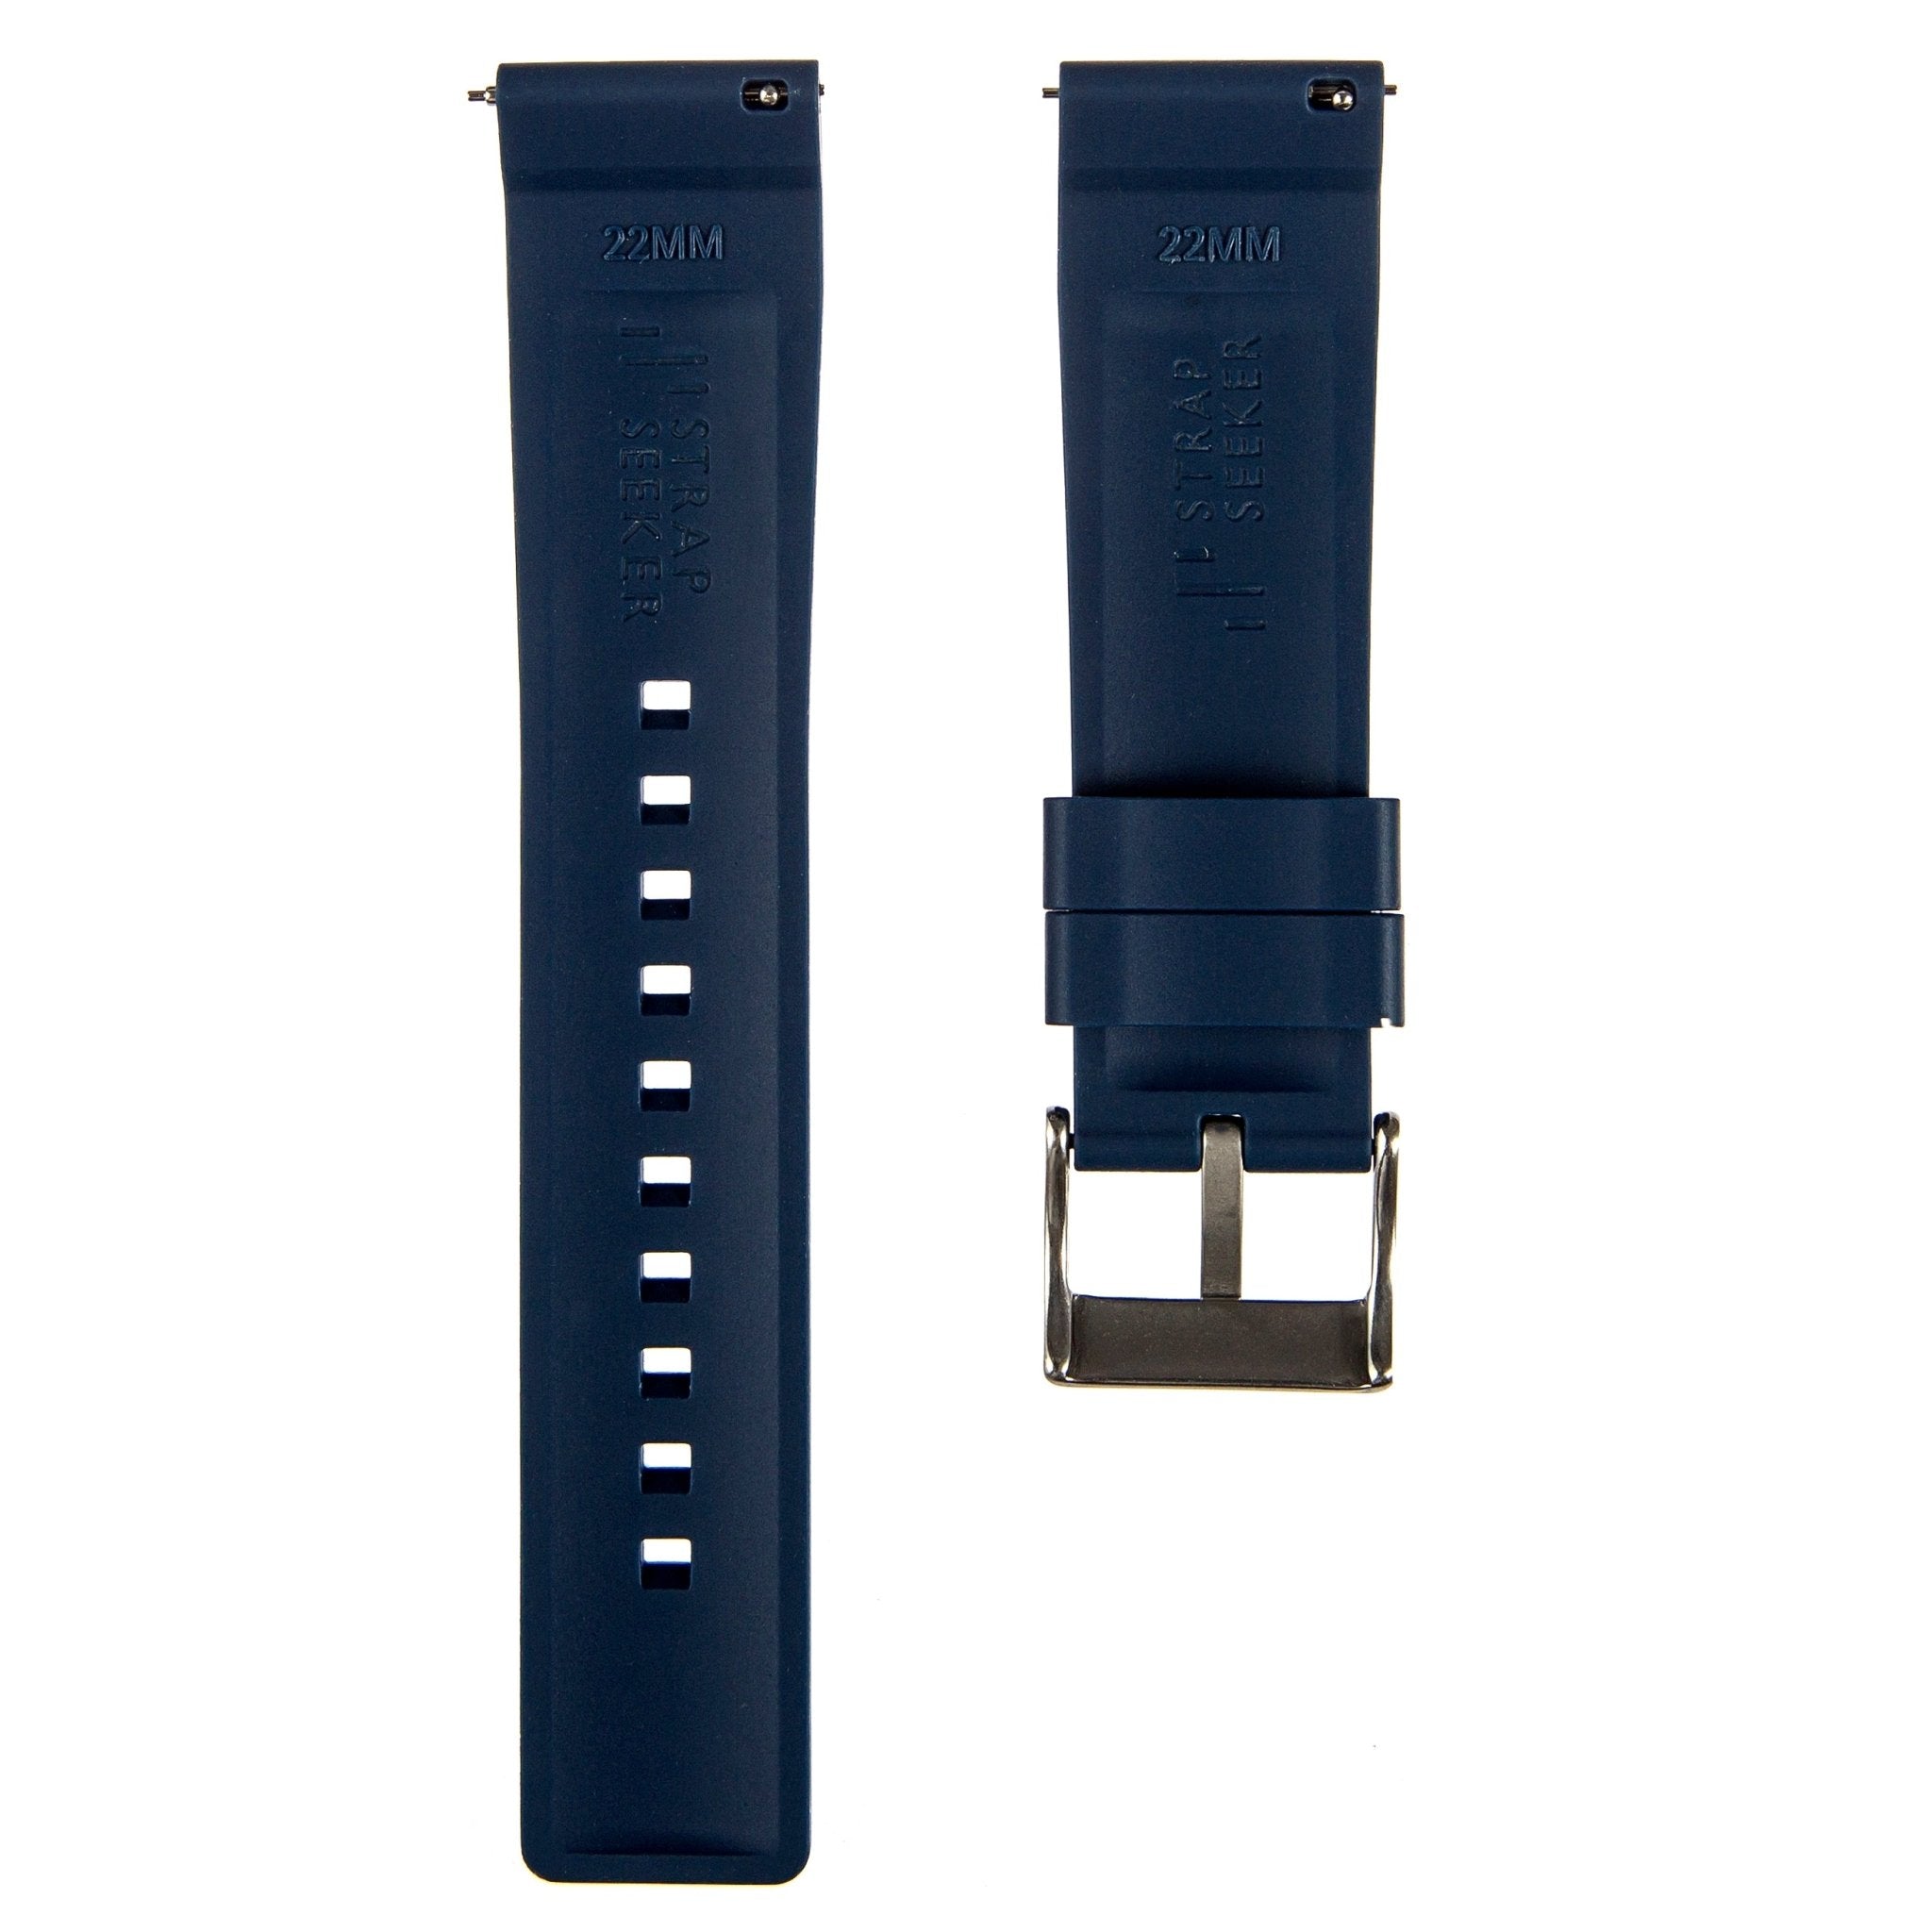 Stryke Premium SIlicone Rubber Strap - Quick-Release - Compatible with Blancpain x Swatch – Navy (2424) -StrapSeeker